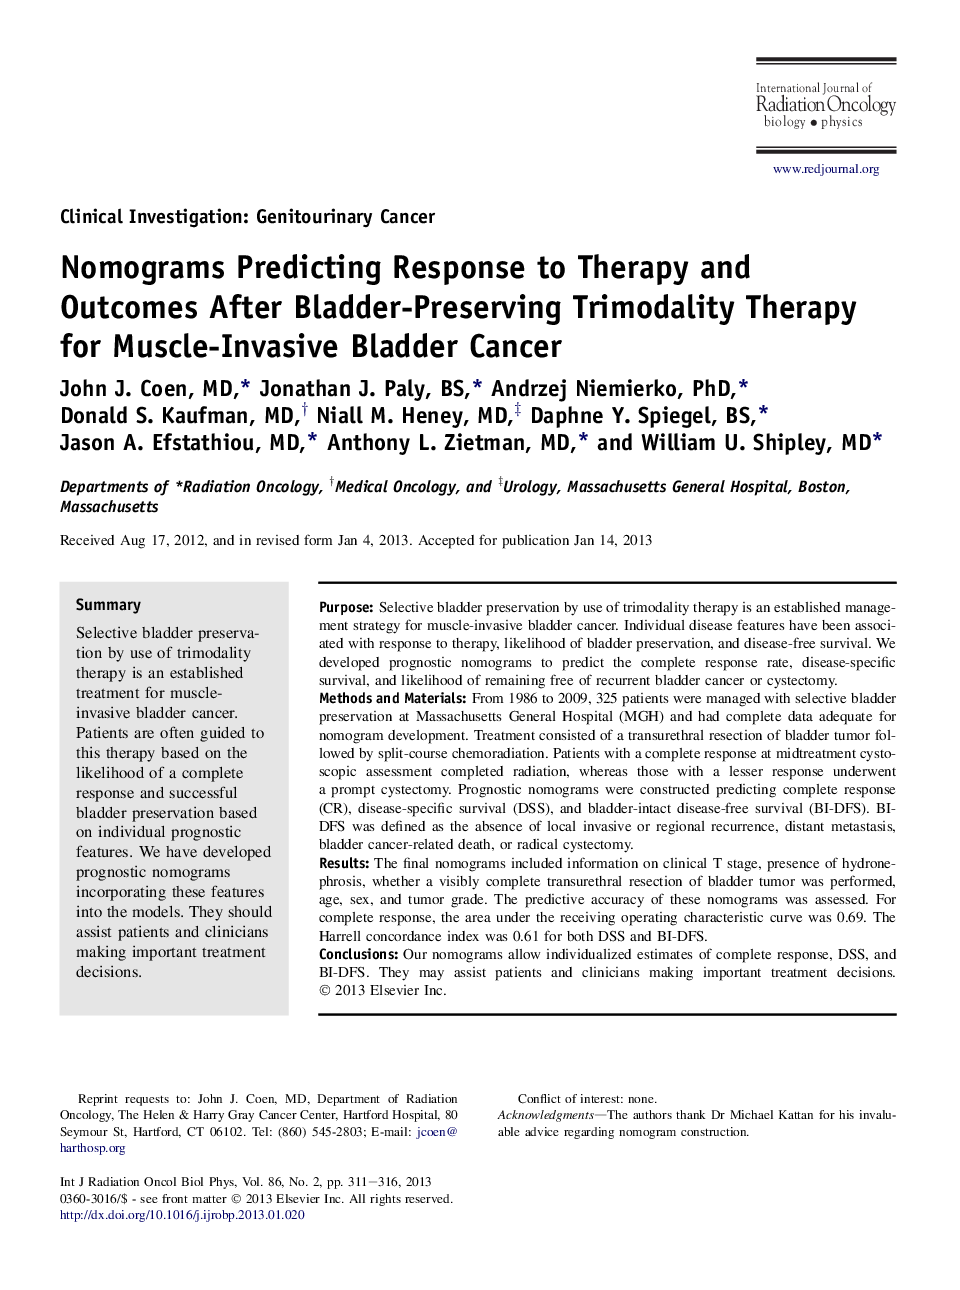 Nomograms Predicting Response to Therapy and Outcomes After Bladder-Preserving Trimodality Therapy for Muscle-Invasive Bladder Cancer